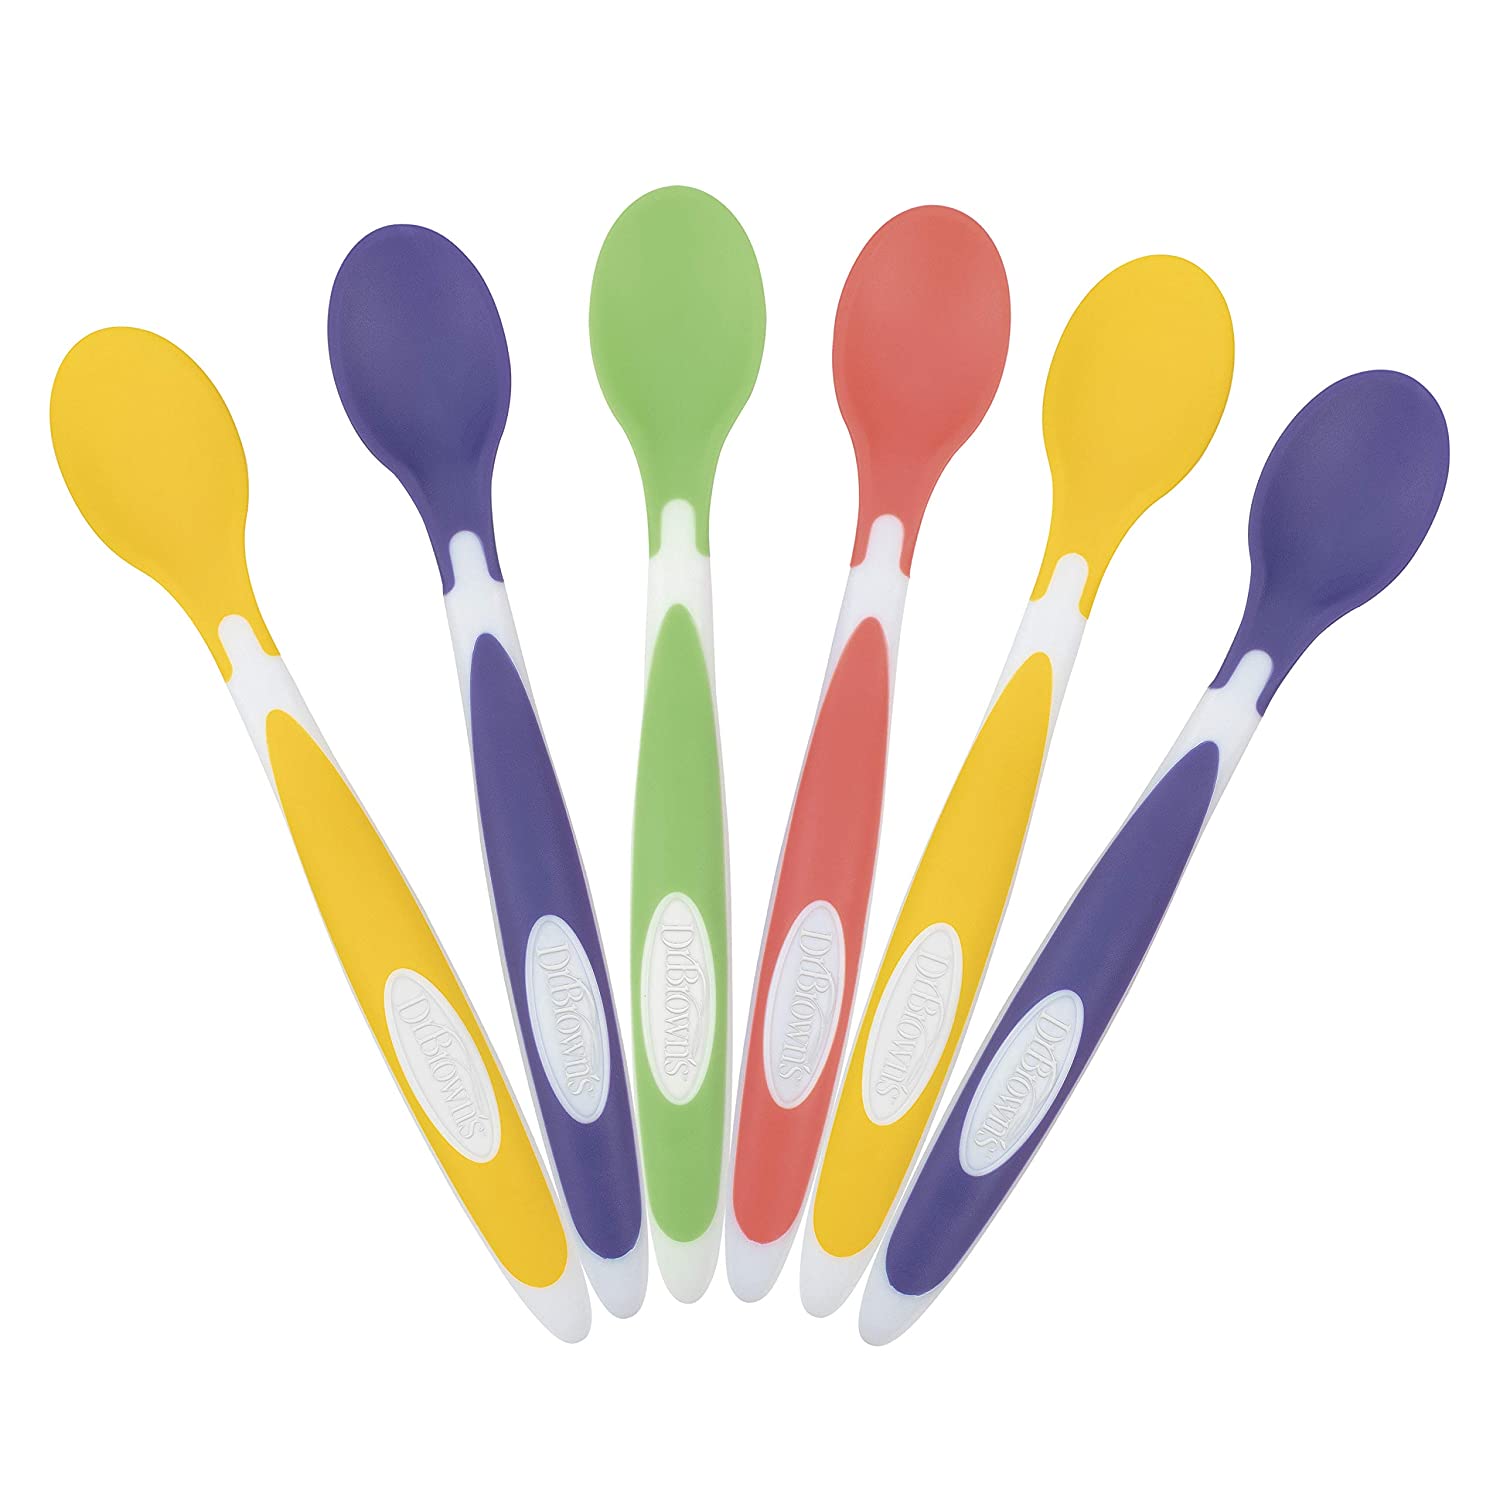 Dr Browns Soft-Tip Spoon, 4-Pack (Yellow, Green, Purple, Red)